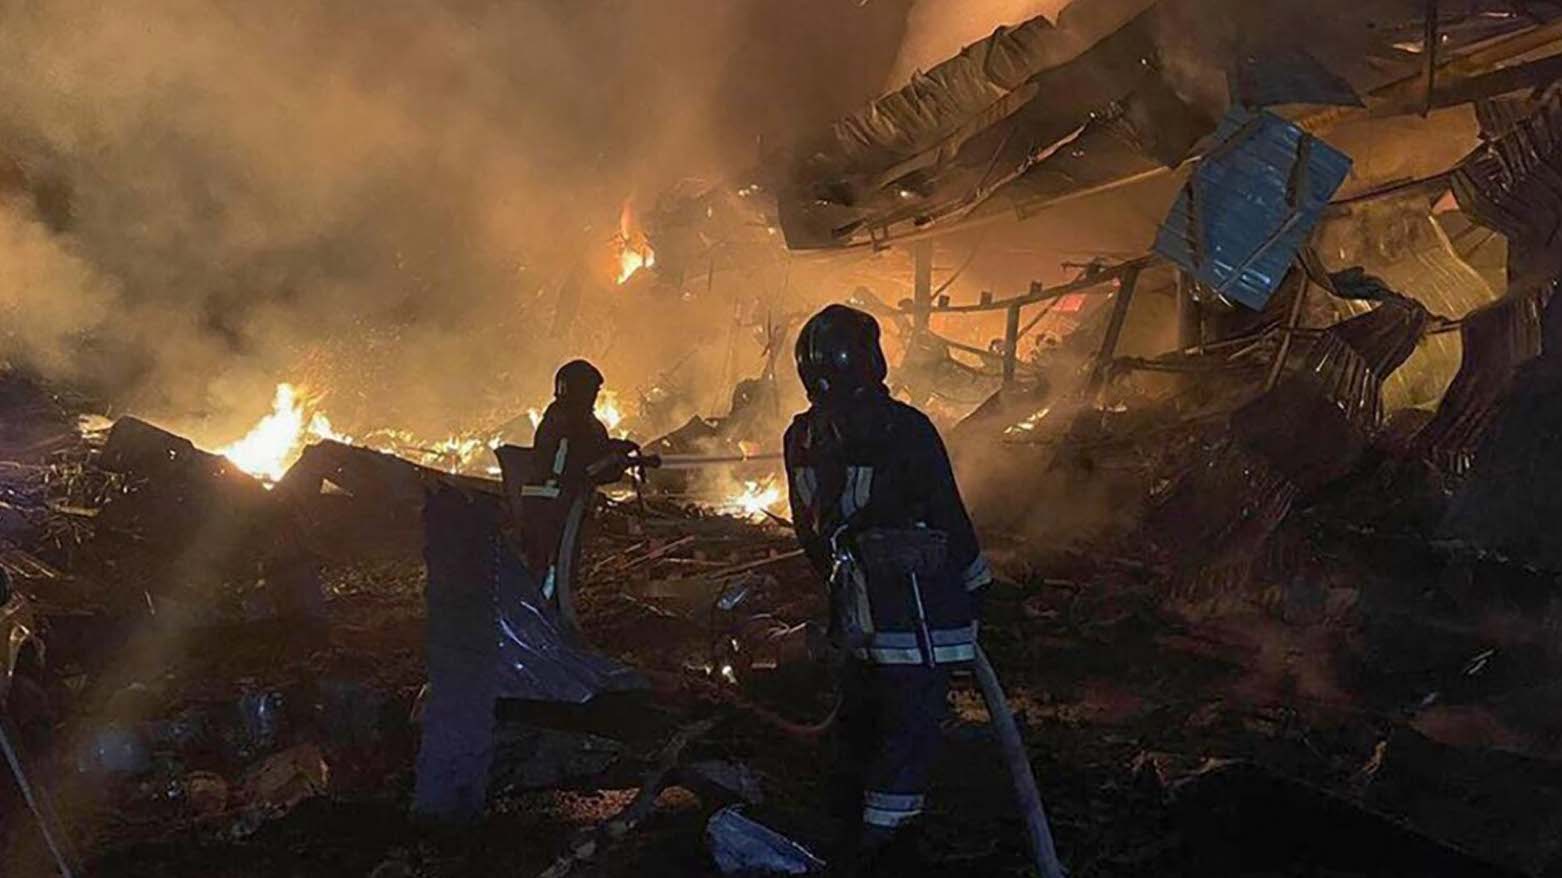 This handout photograph taken and released by Ukrainian Emergency Service on August 14, 2023, shows rescuers pushing out a fire in a supermarket after a night strike in Odesa on Aug. 14, 2023. (Photo: Handout/Ukrainian Emergency Service/AFP